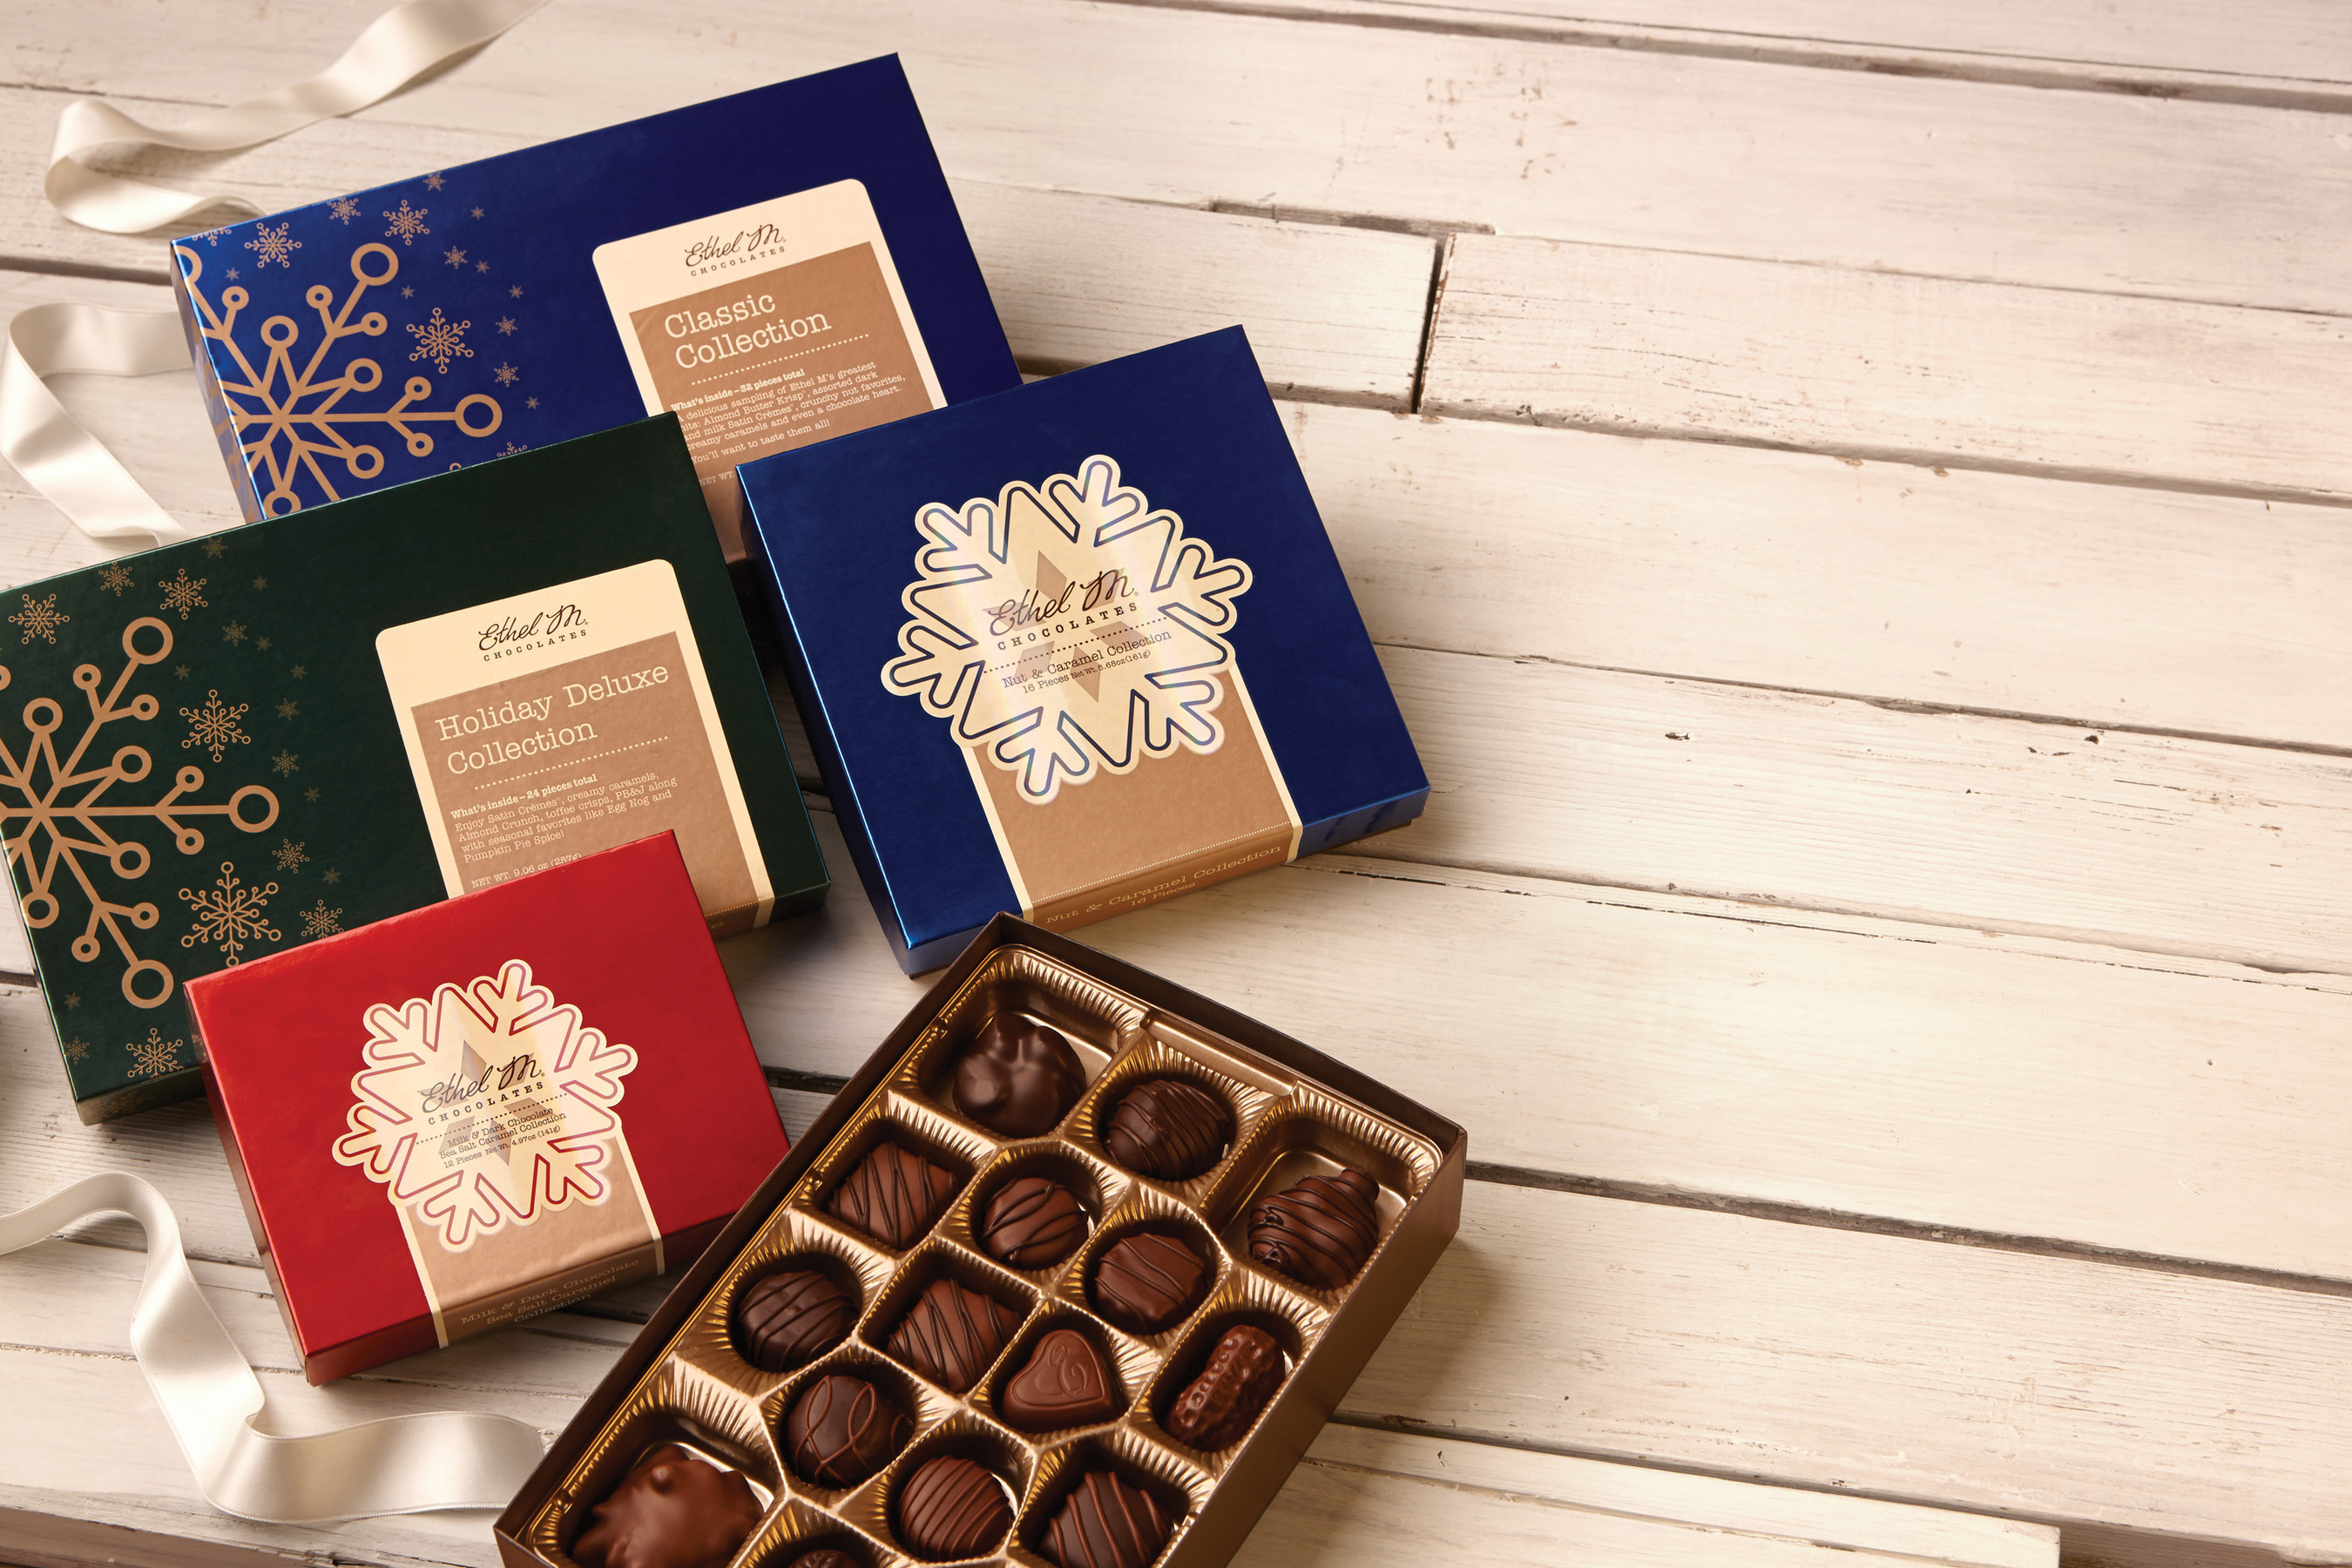 This holiday, give the gift of gourmet Ethel M(R) Chocolates (www.EthelM.com). These affordable premium confections are meticulously crafted of the finest ingredients and infused with the season's most festive flavors of peppermint, pumpkin, pecan pie, egg nog and butter rum. Based on family recipes handed down through generations, Ethel M(R) Chocolates are handcrafted in small batches and made with fresh, quality ingredients without preservatives. It's the perfect holiday gift for chocolate lovers...